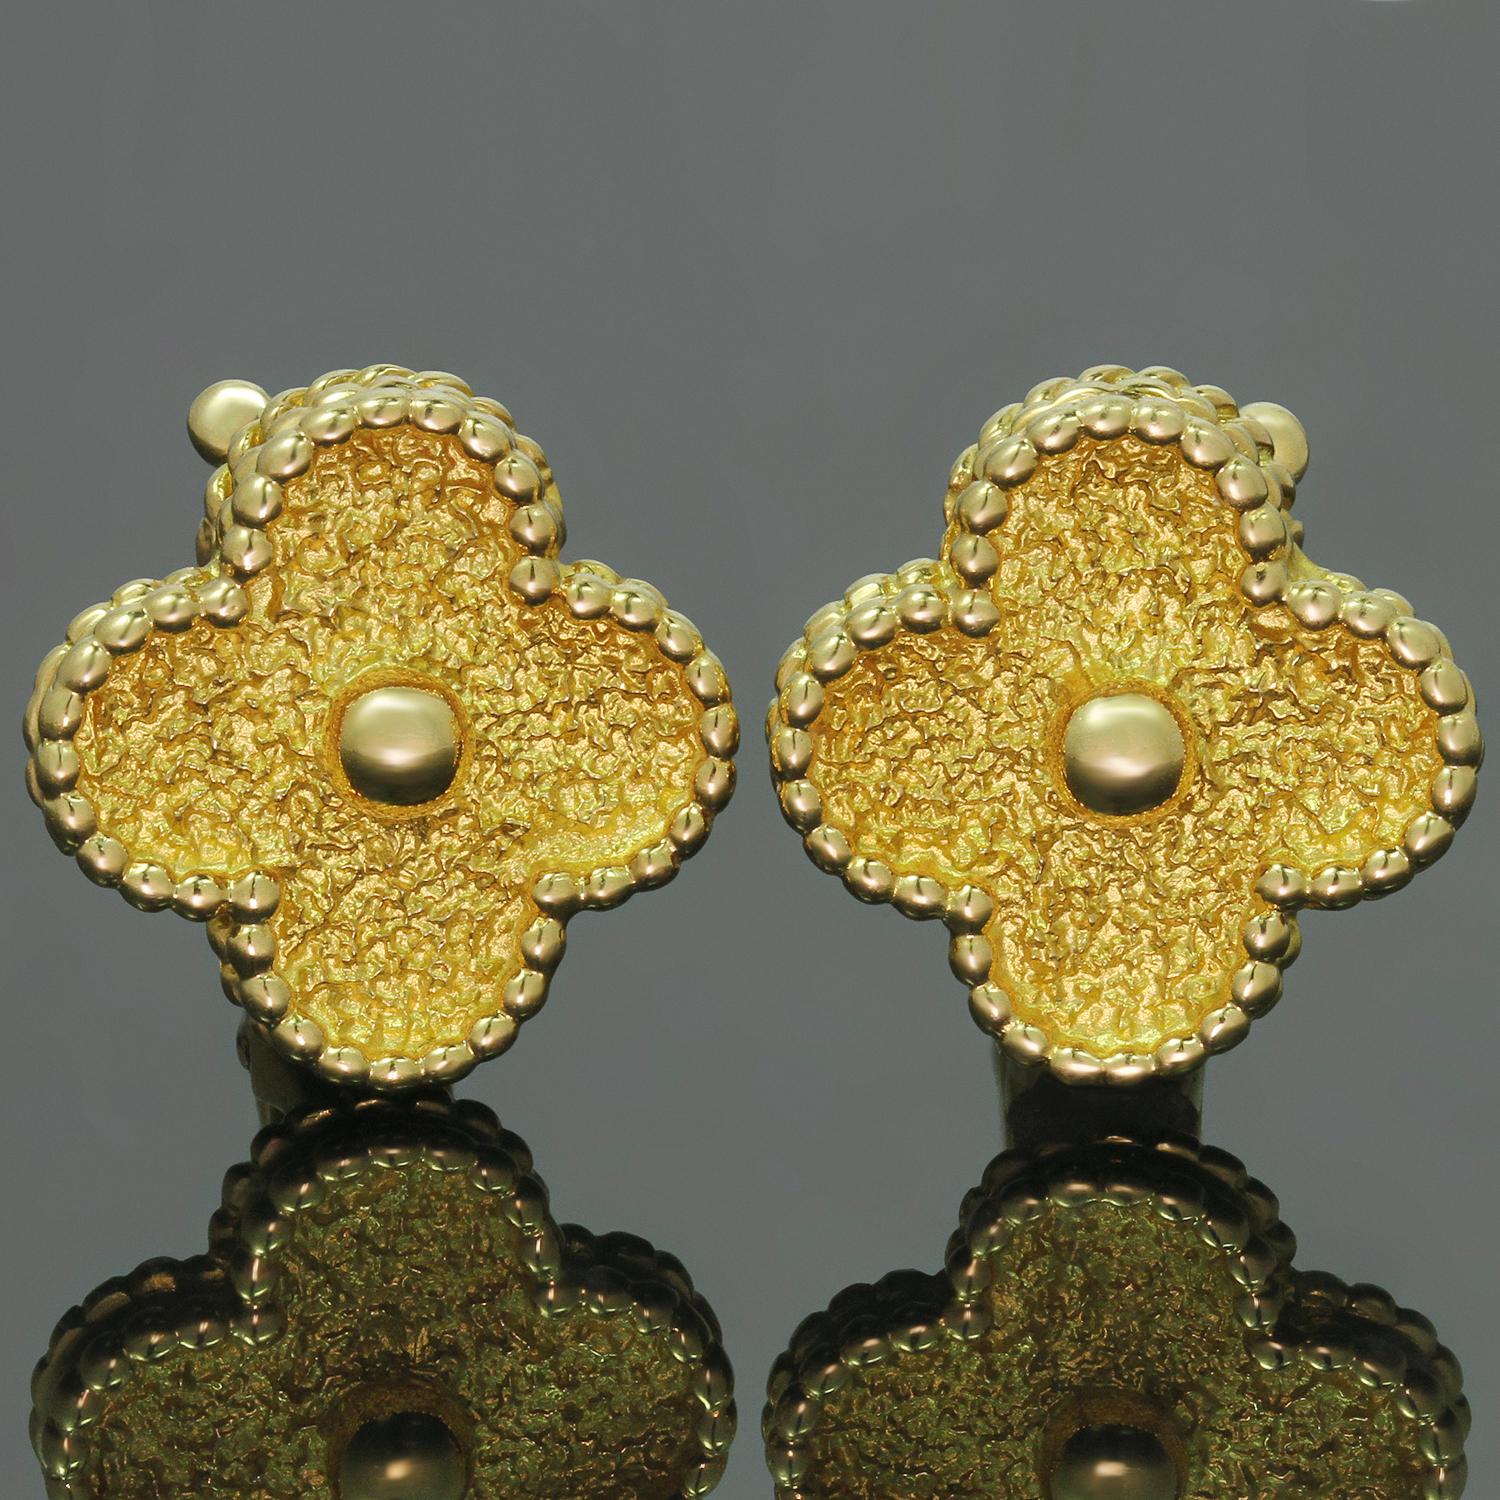 These classic clip-on earrings from the Vintage Alhambra collection by Van Cleef & Arpels feature the iconic and festive design inspired by the symbol of luck crafted in 18k yellow gold. Made in France circa 2000s. Excellent condition. Comes with